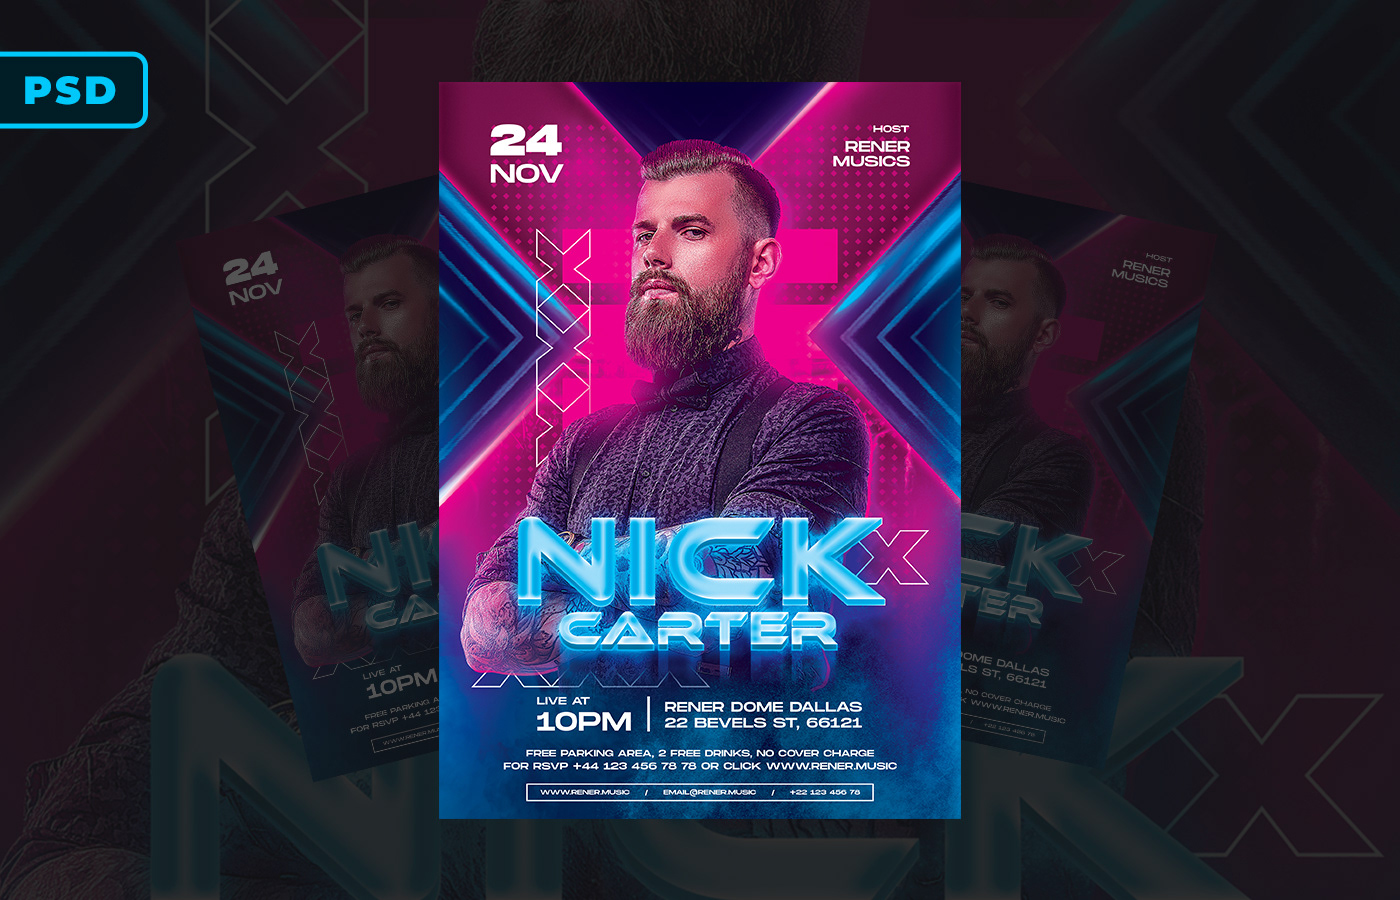 Night Club Flyer - PSD Template on Behance Within Free Nightclub Flyer Templates